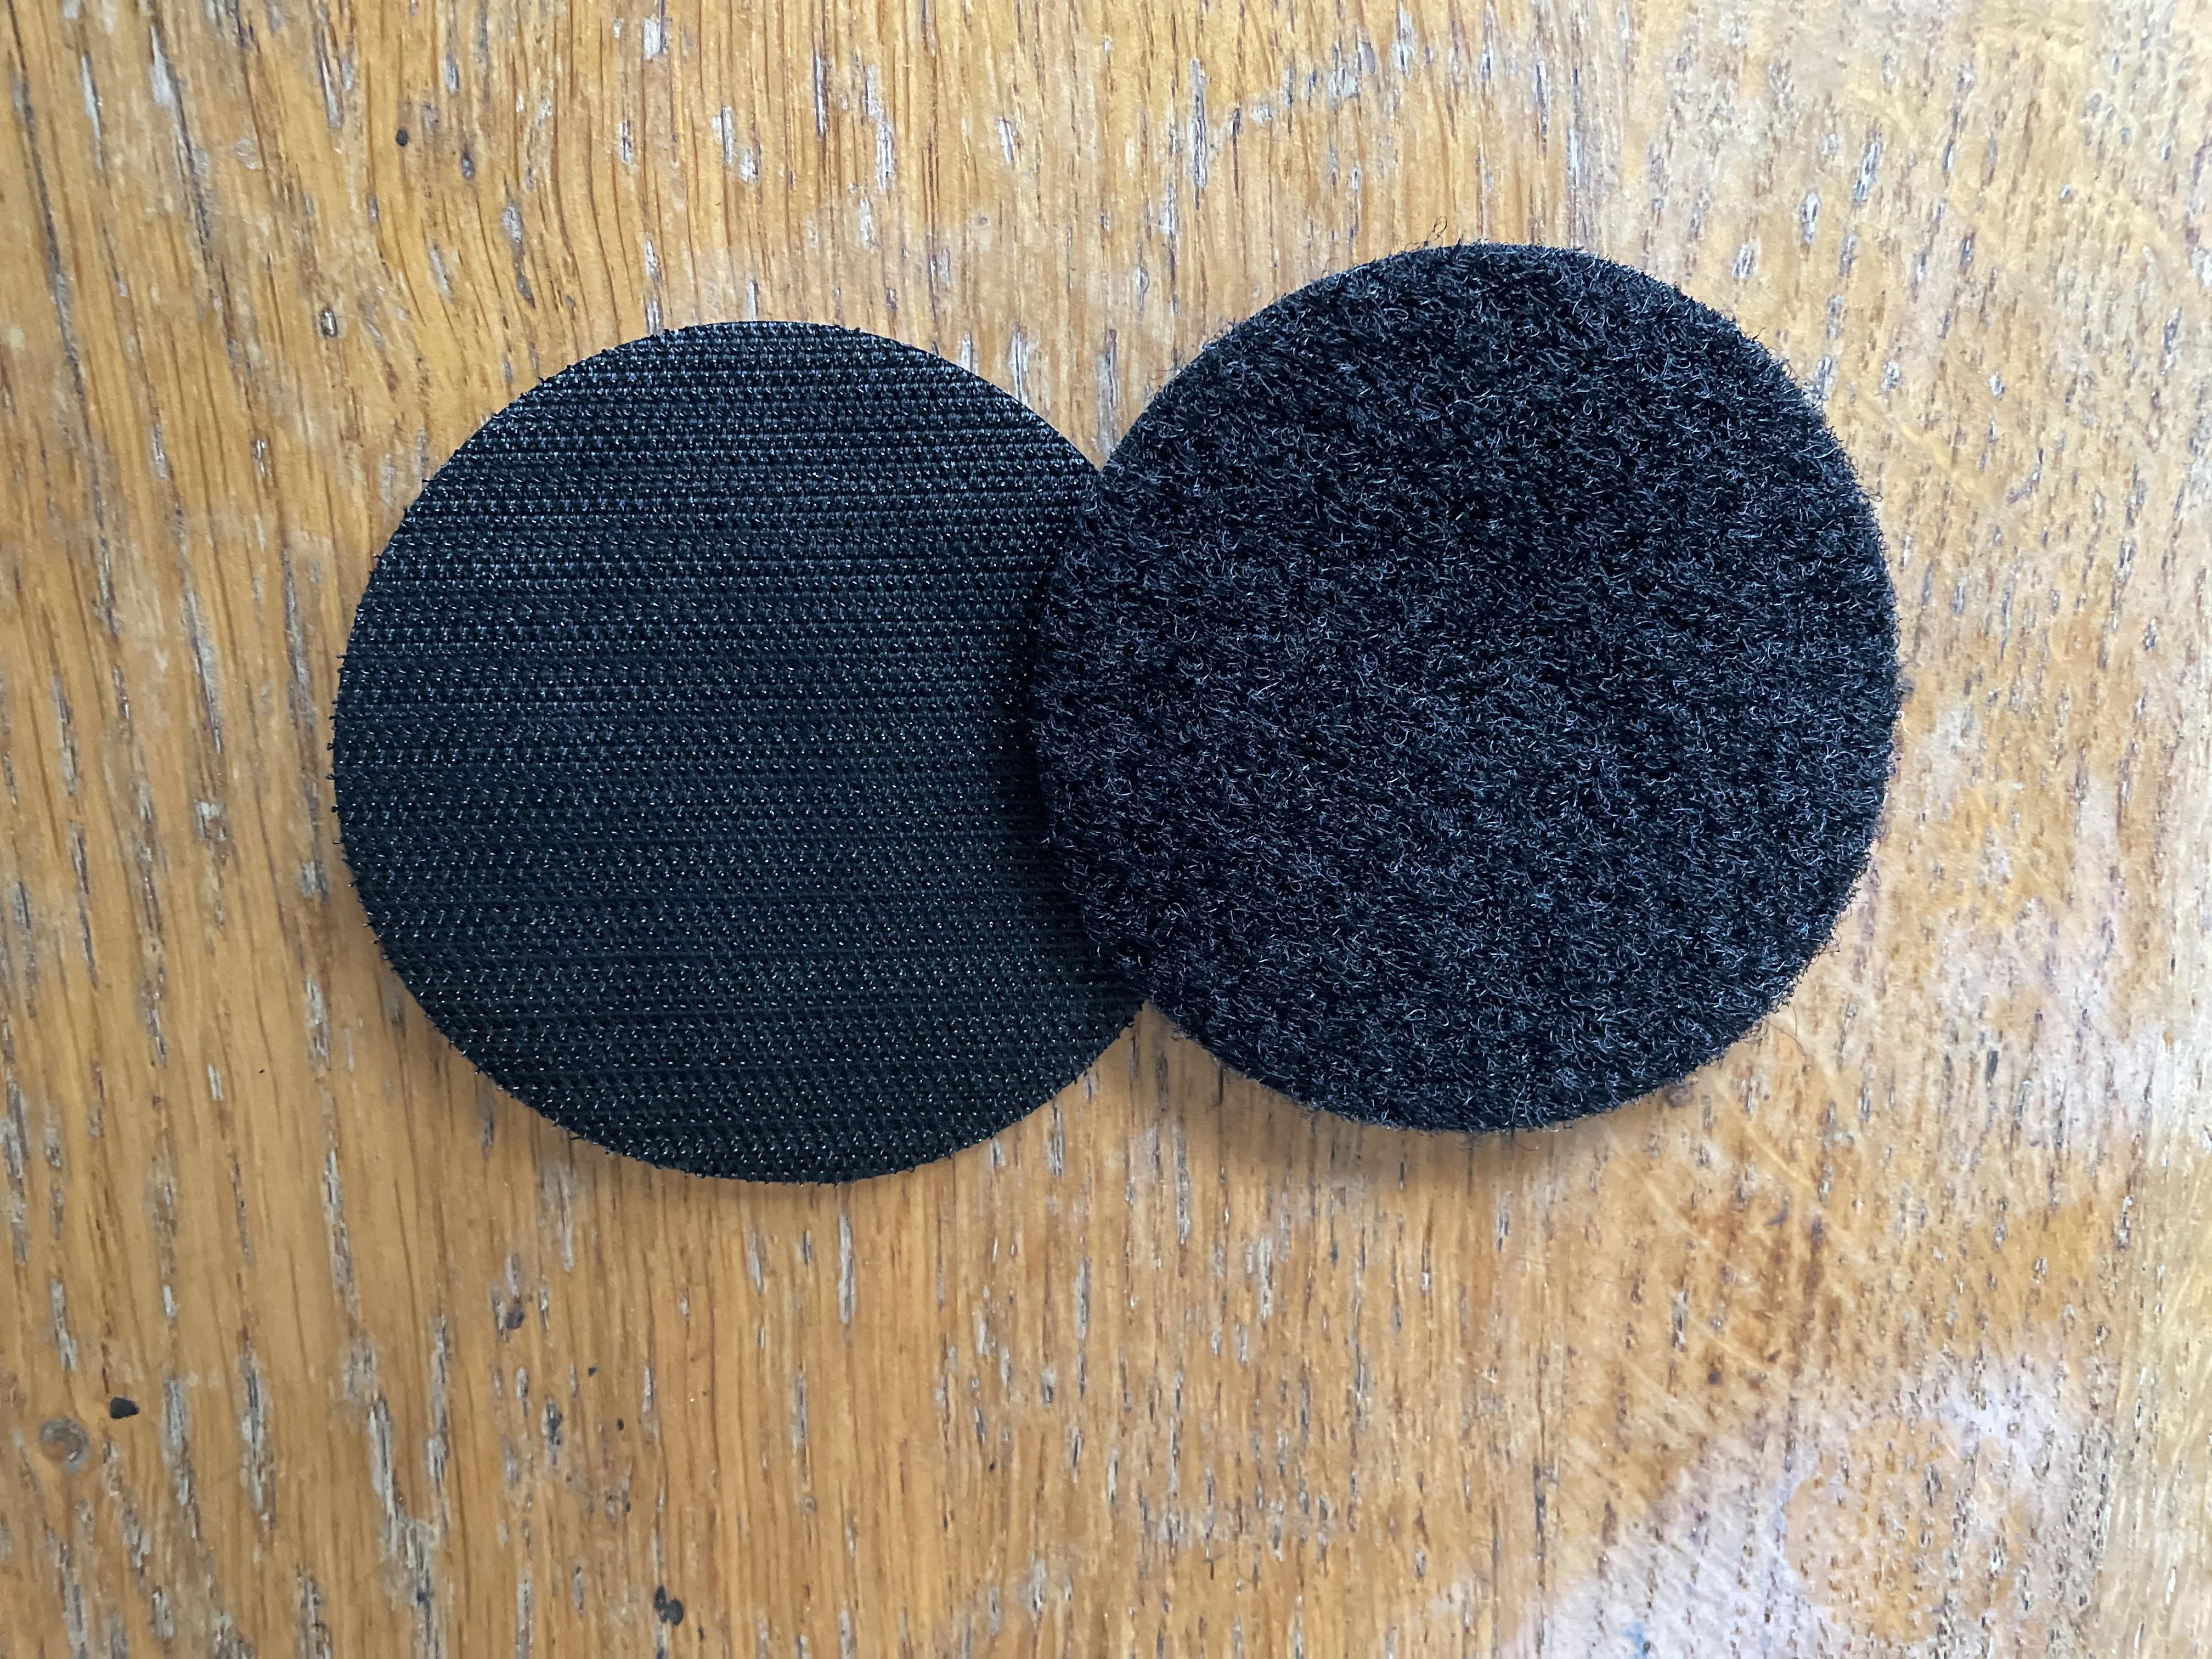 Embroidered patch Velcro